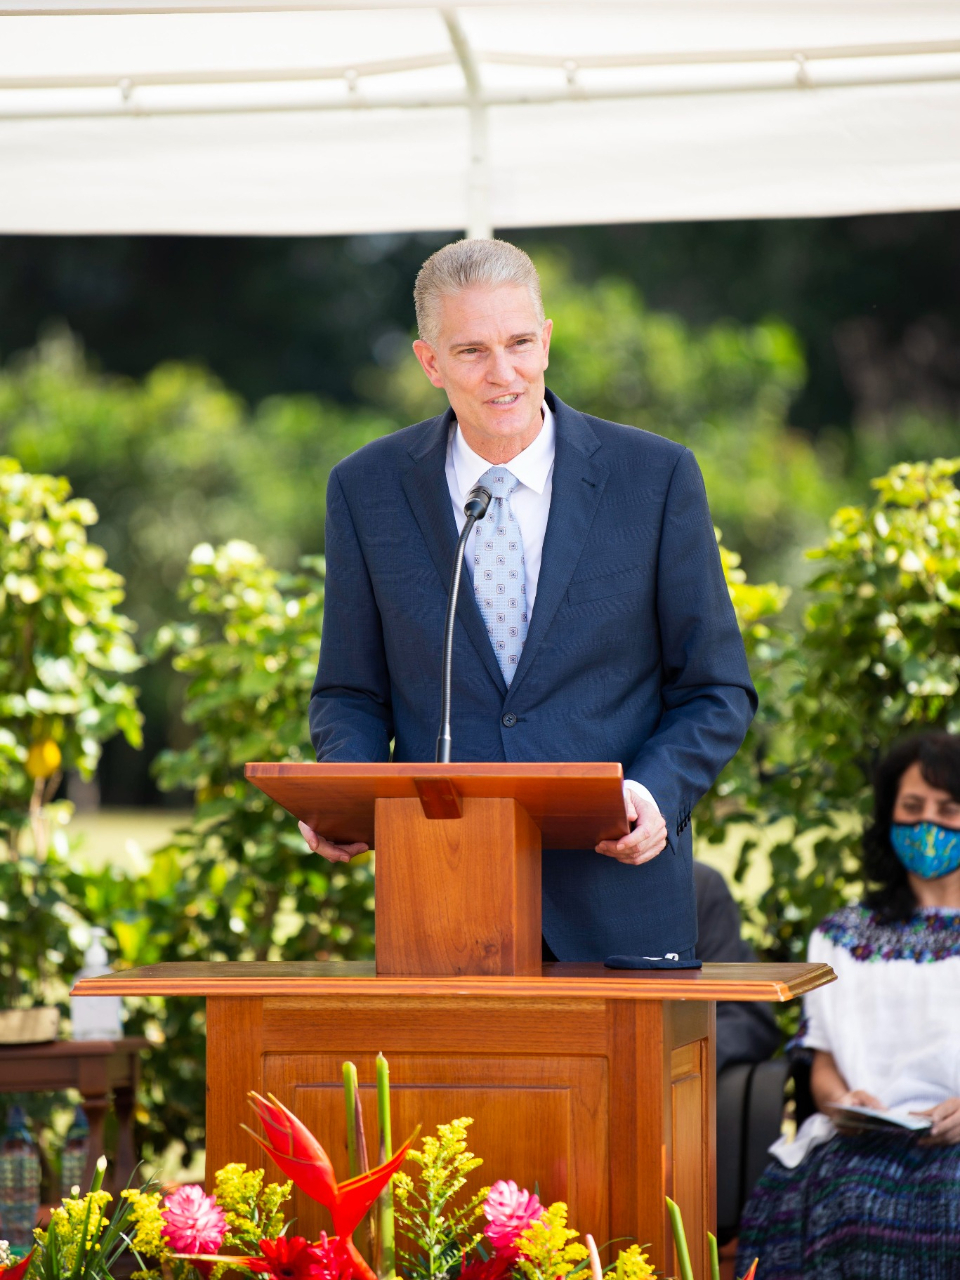 A man in a suit and tie speaking from a pulpit outside.